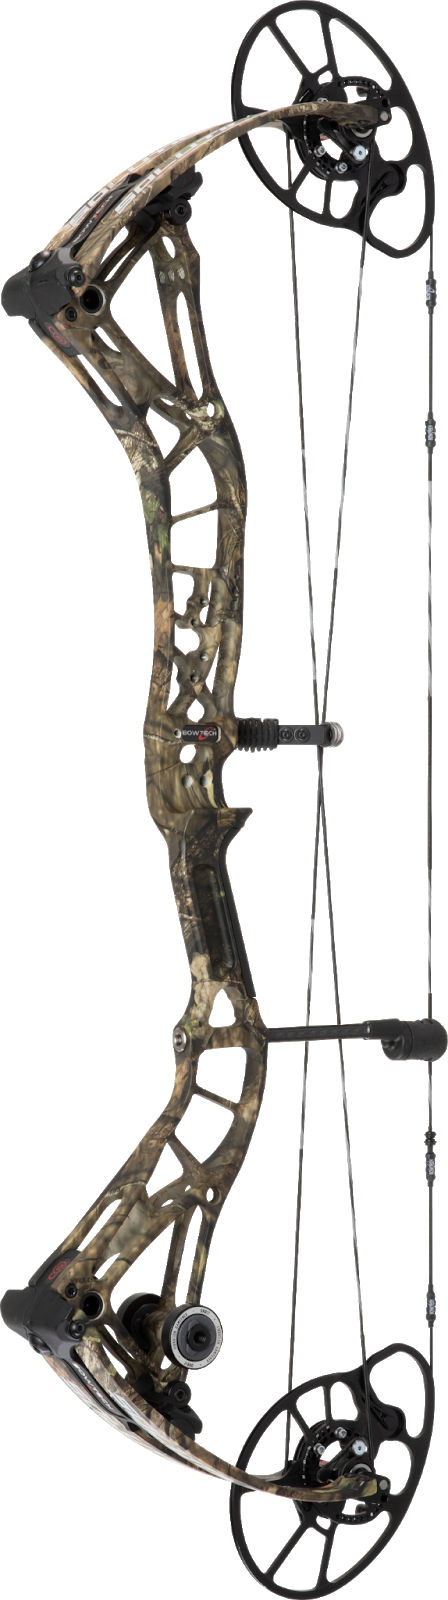 Bowtech solution hunting bow